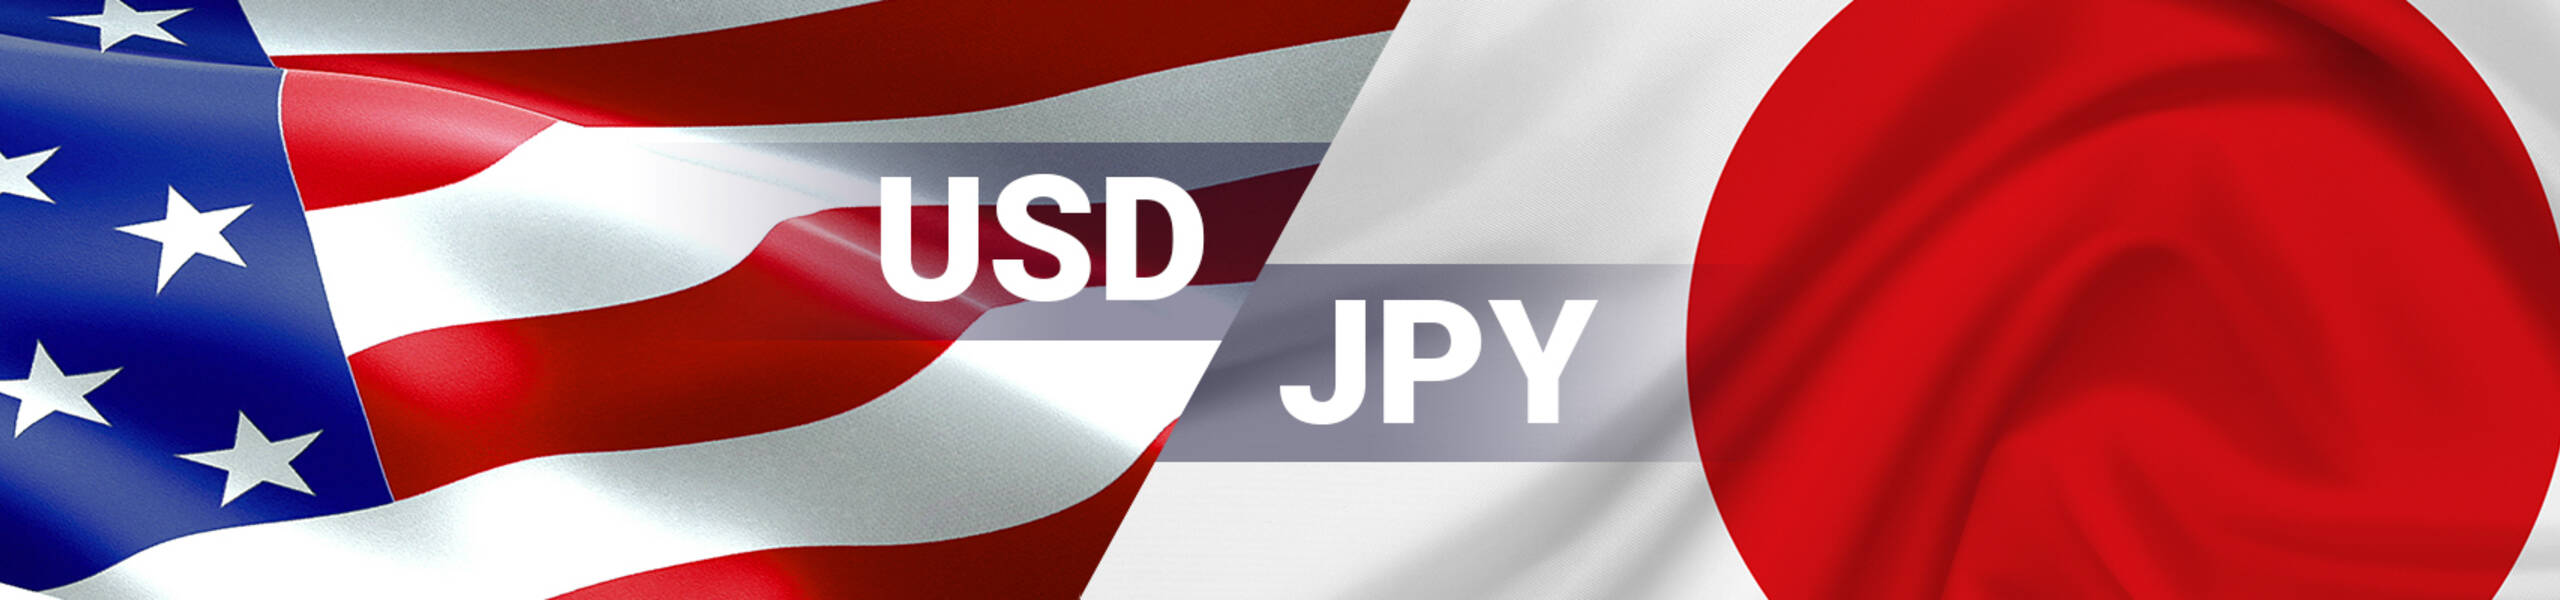 USD/JPY Dailyレポート 2017/10/03